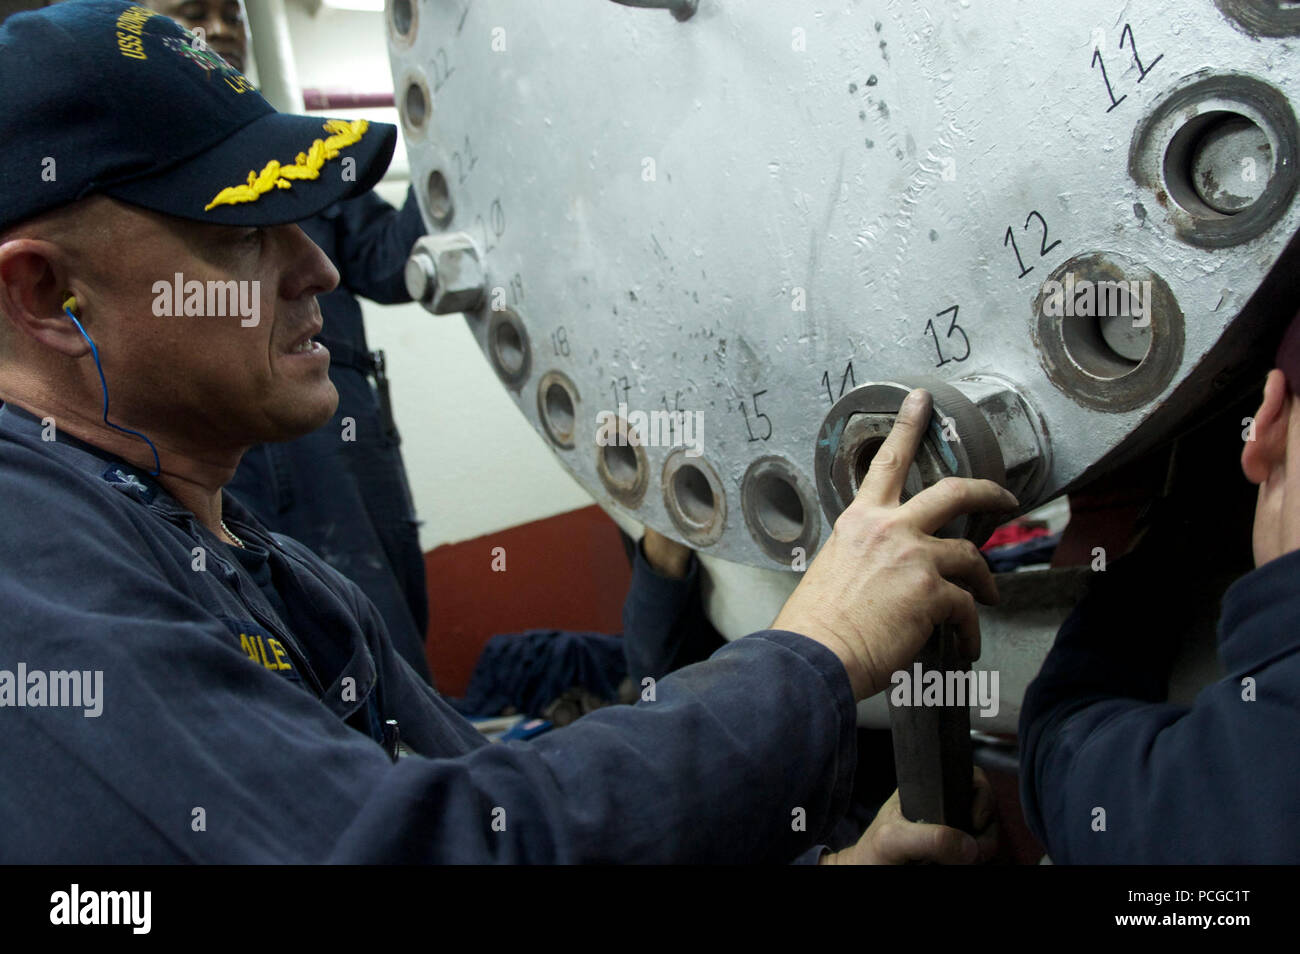 Cmdr. Robert Bailey, chief engineer aboard the amphibious assault ship USS Bonhomme Richard (LHD 6), removes a bolt during repairs to one of the ship's boilers during a port call in Okinawa, Japan. The ship is en route to relieve USS Essex (LHD 2) in Sasebo, Japan. Stock Photo